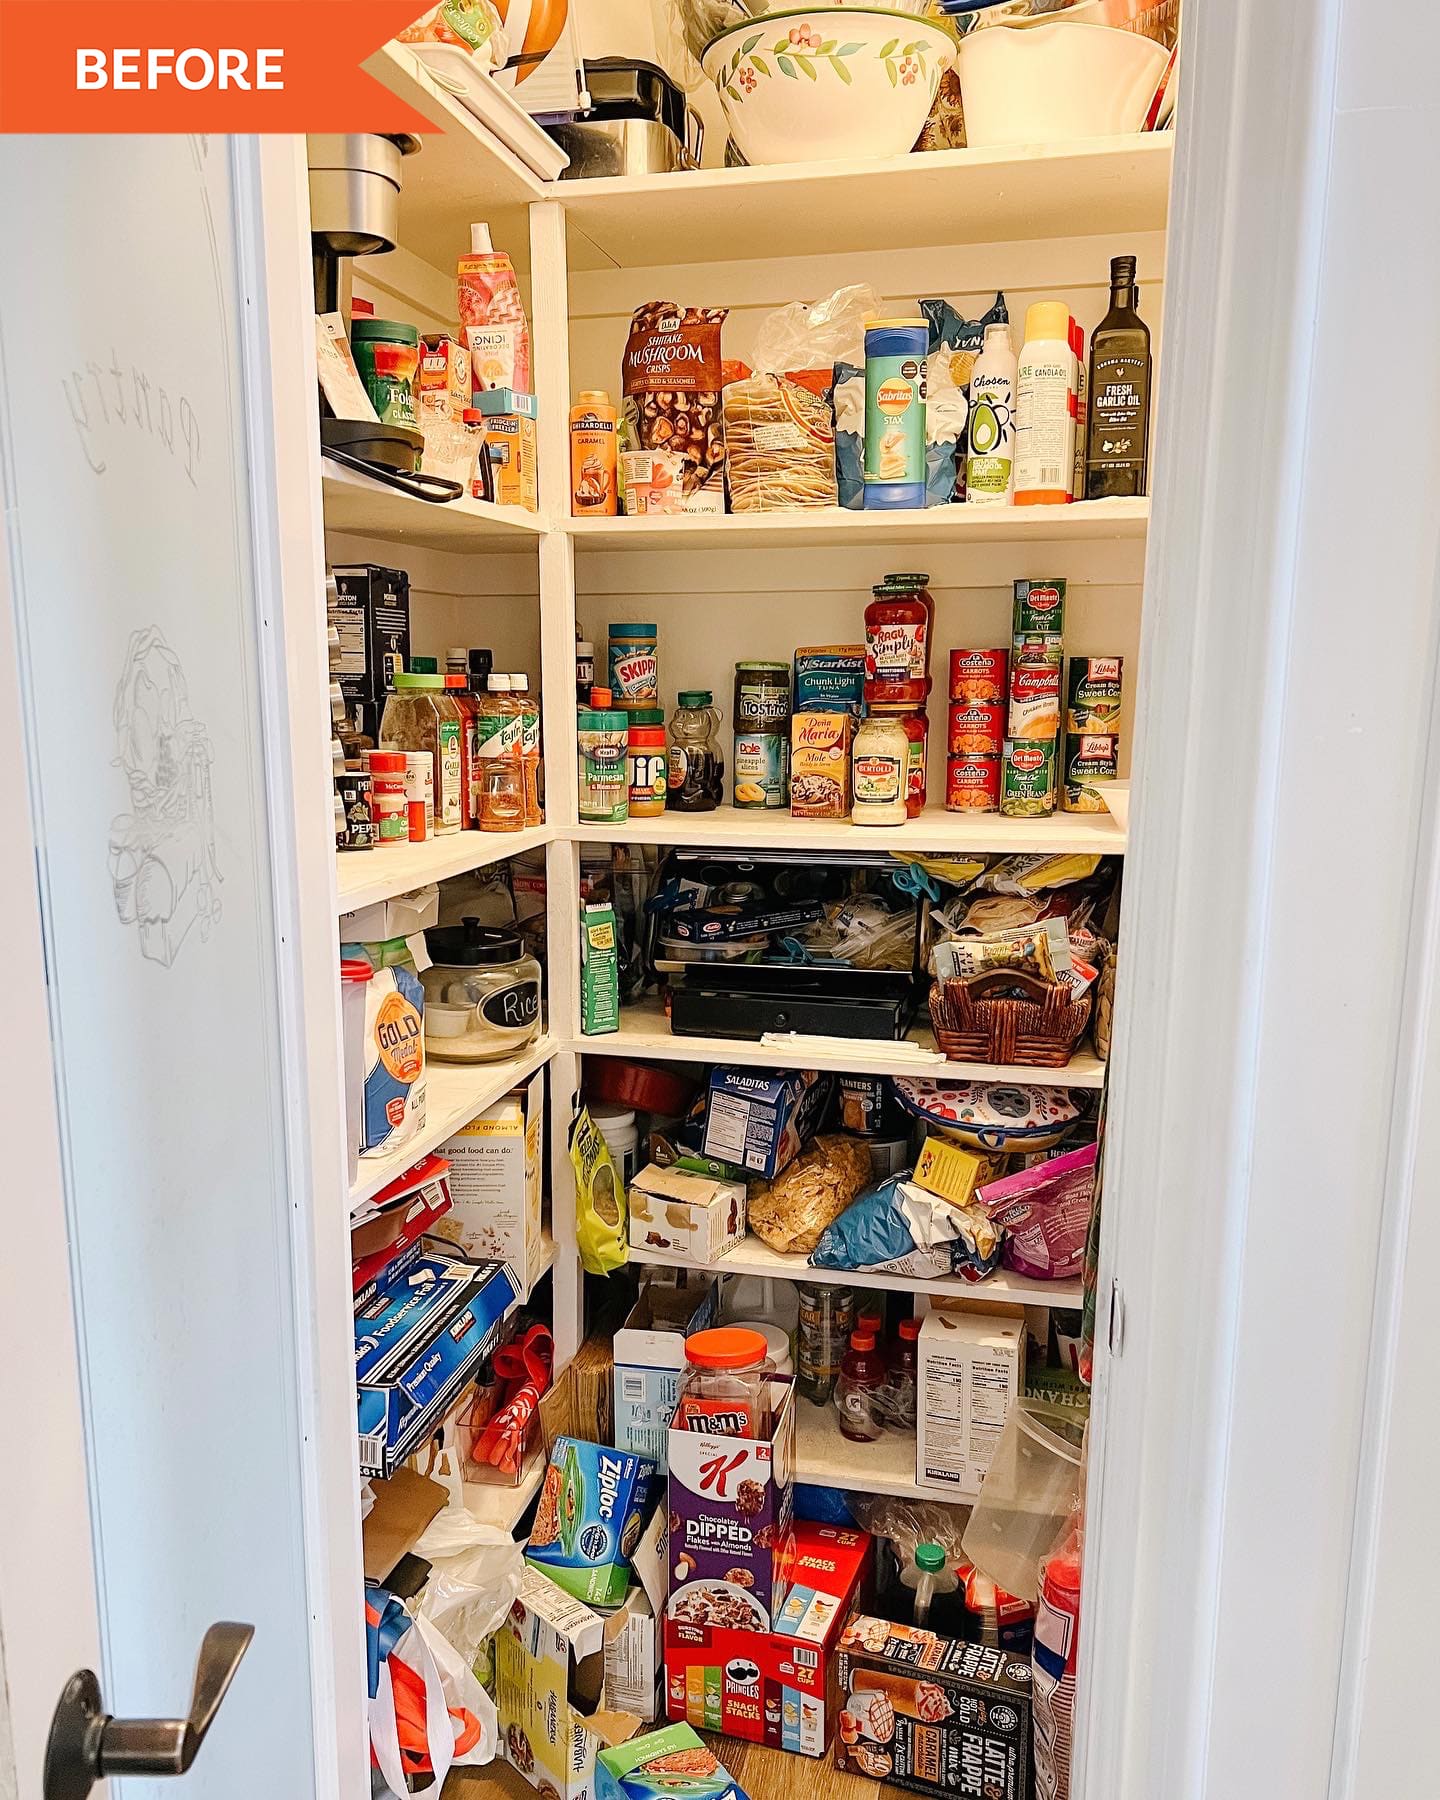 https://cdn.apartmenttherapy.info/image/upload/v1661788892/at/organize-clean/before-after/Bianca%20Delatorre%20Pantry/BiancaDelatorre_111372791_AA28B69A500F444297020BABFE06D6FC.jpg